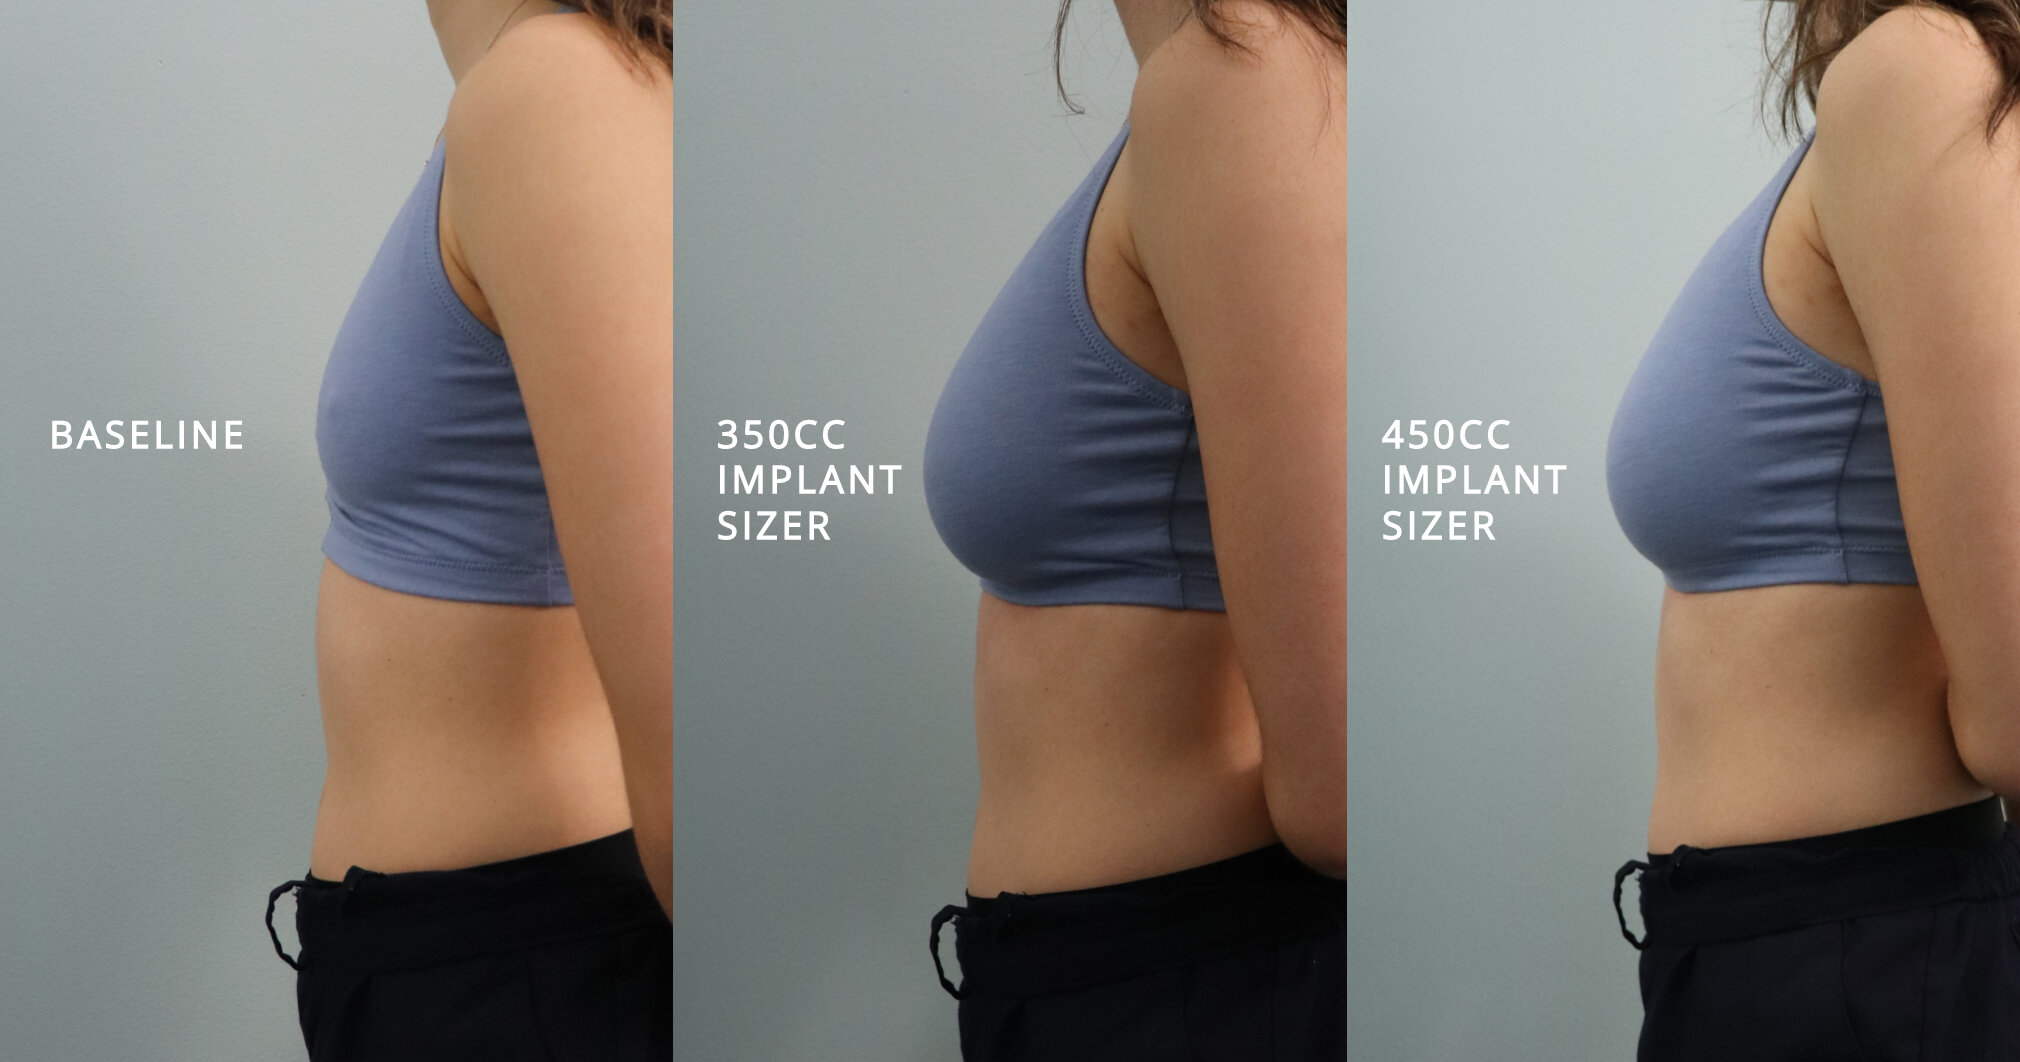 What To Expect At Your Breast Augmentation Consultation Usha Rajagopal Md